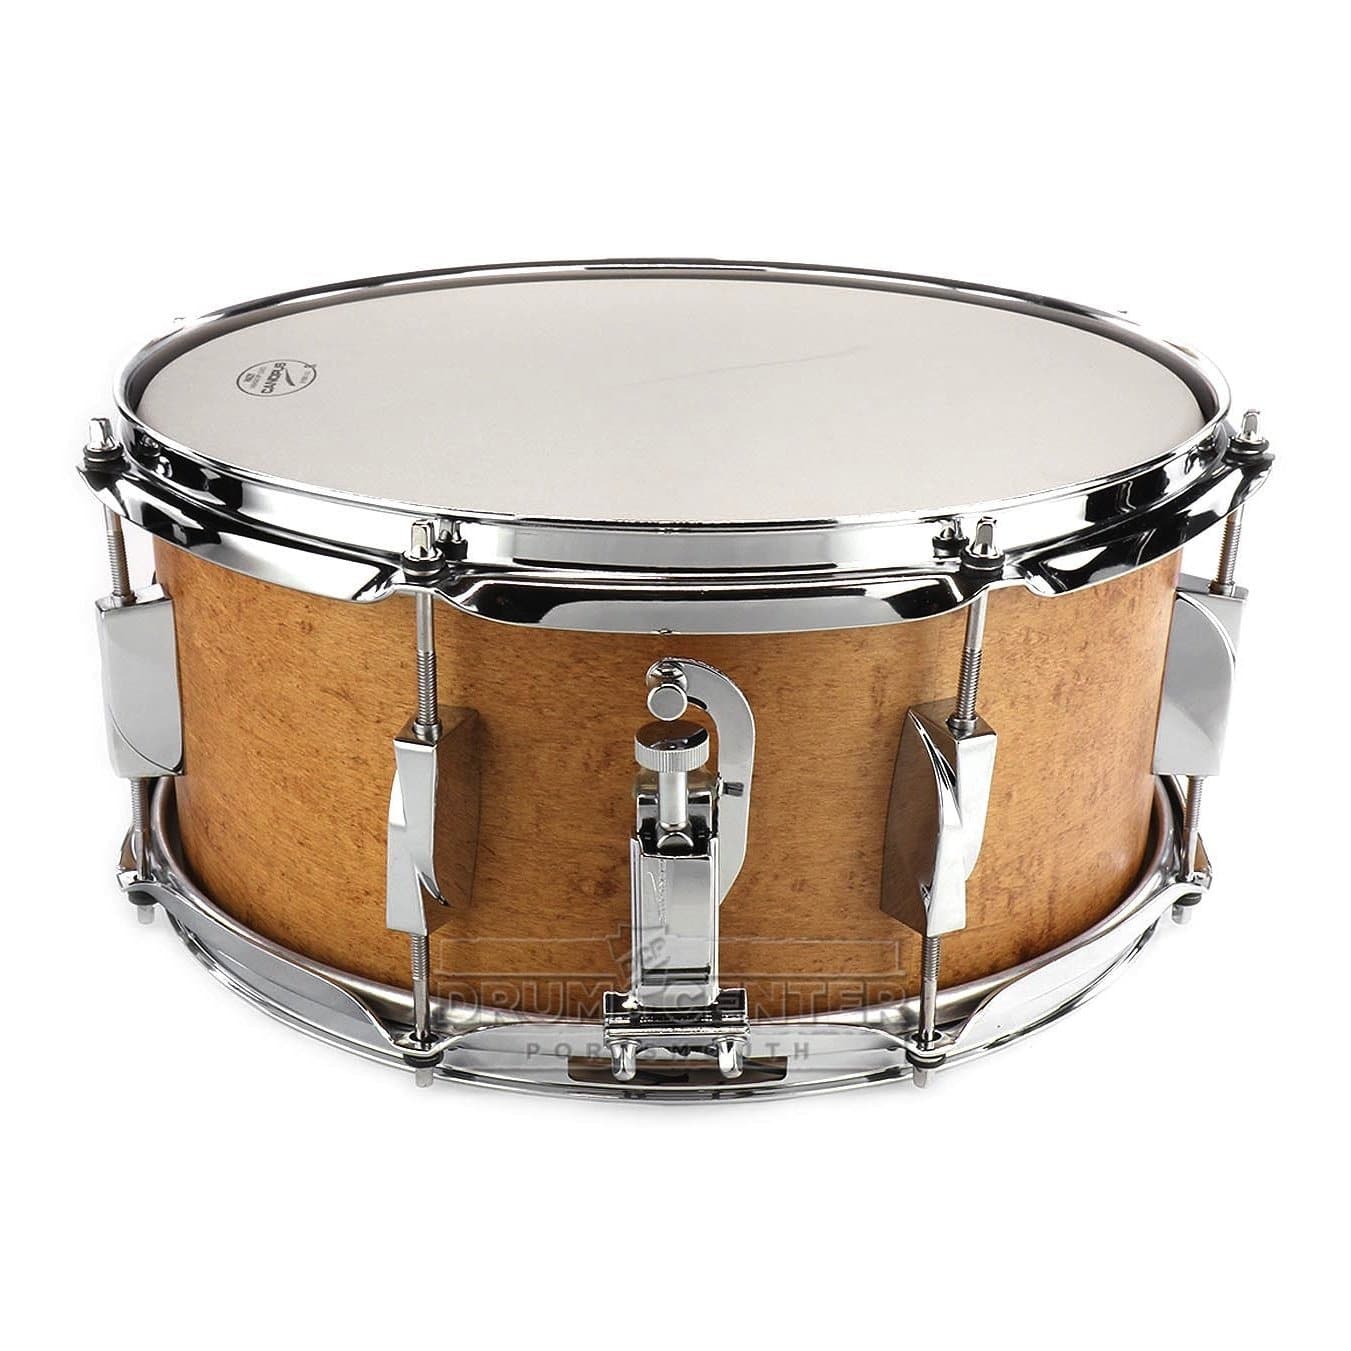 Canopus Drums Natural Oil Snare Drum 4x5.5